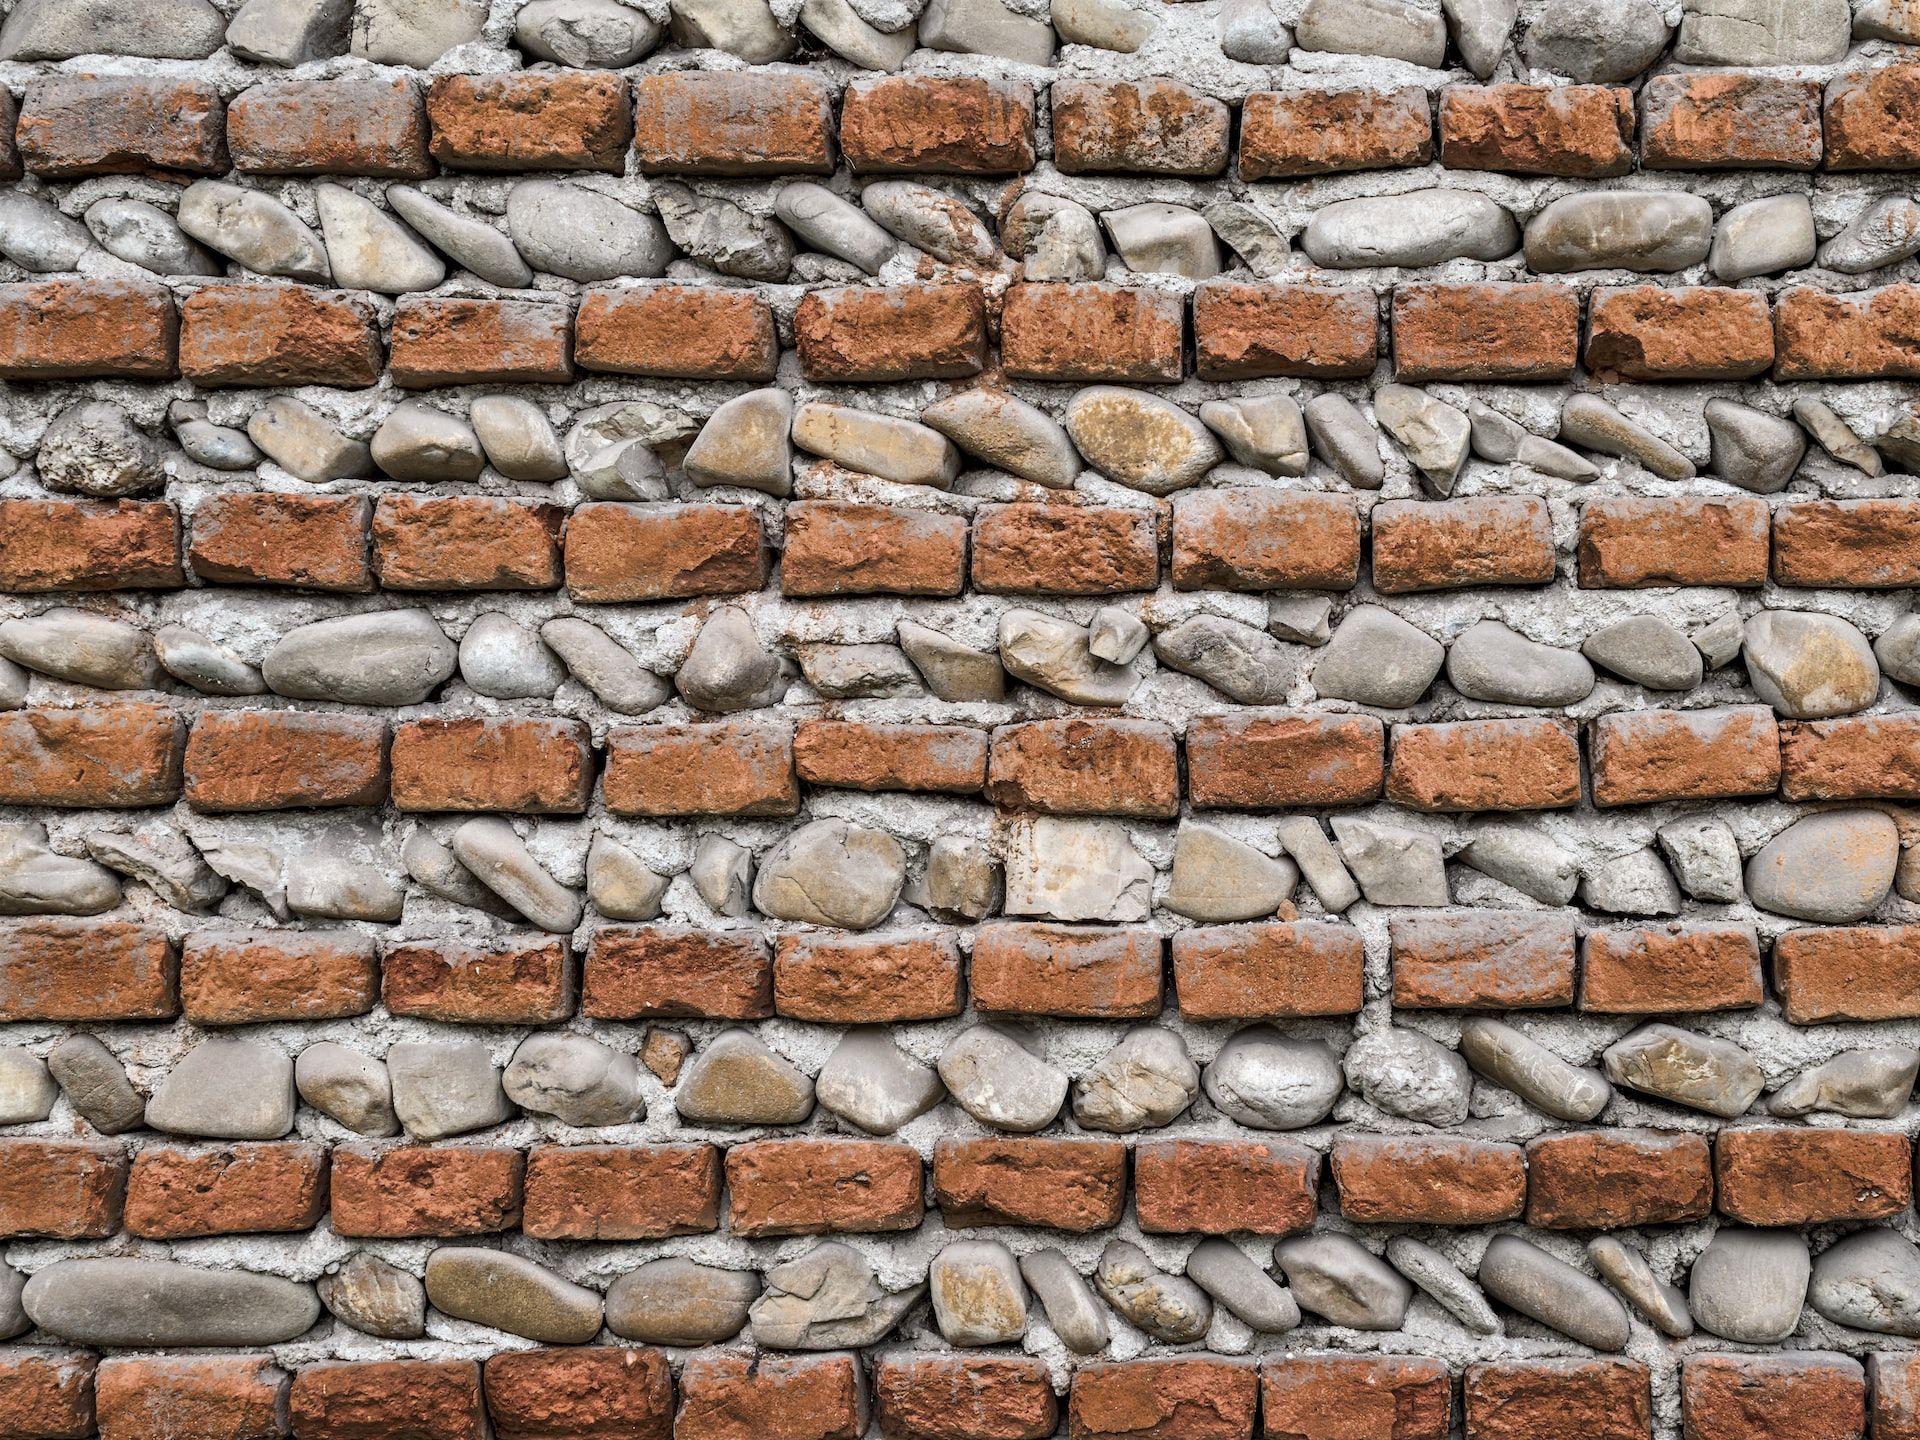 are stone walls made of stone or cladding